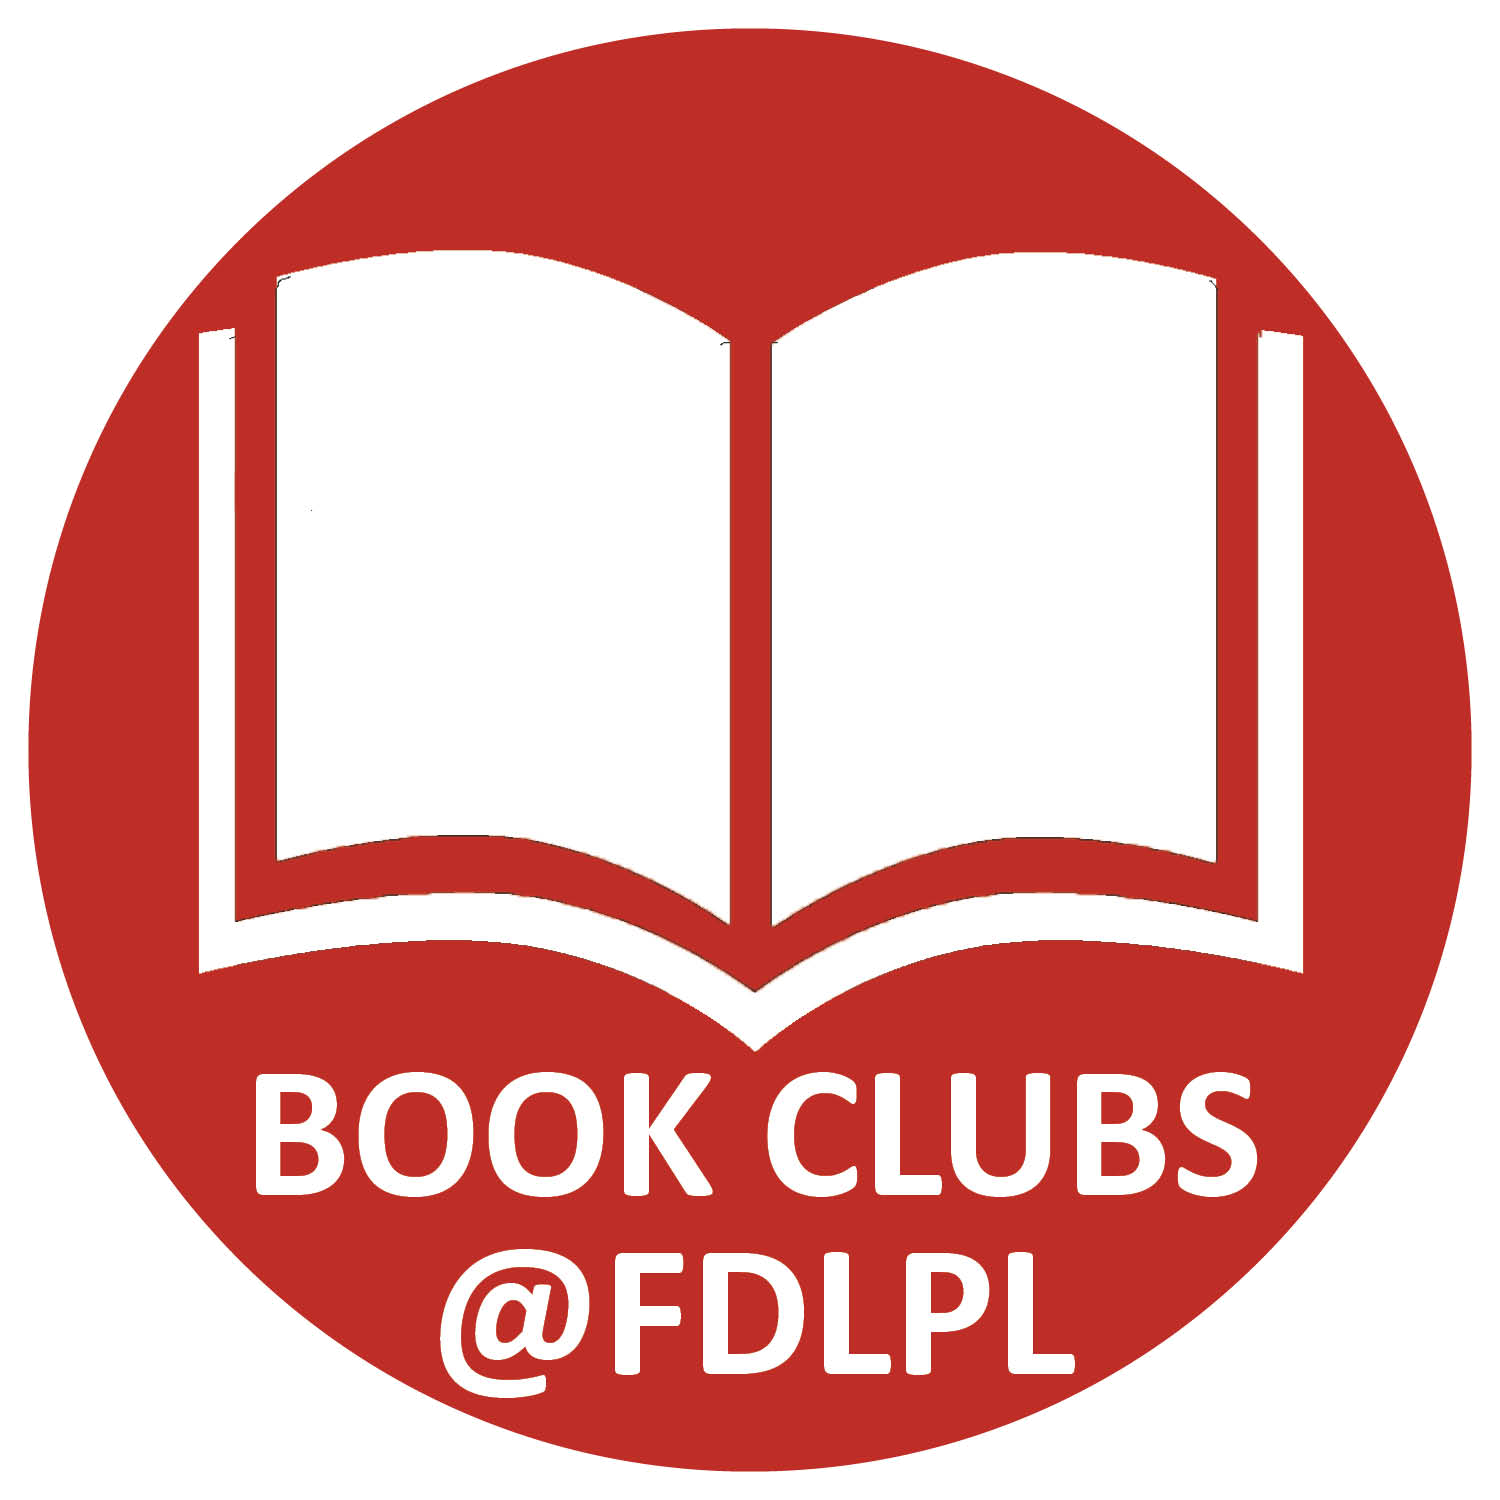 Book-lovers unite! Chat about books at FDLPL during December